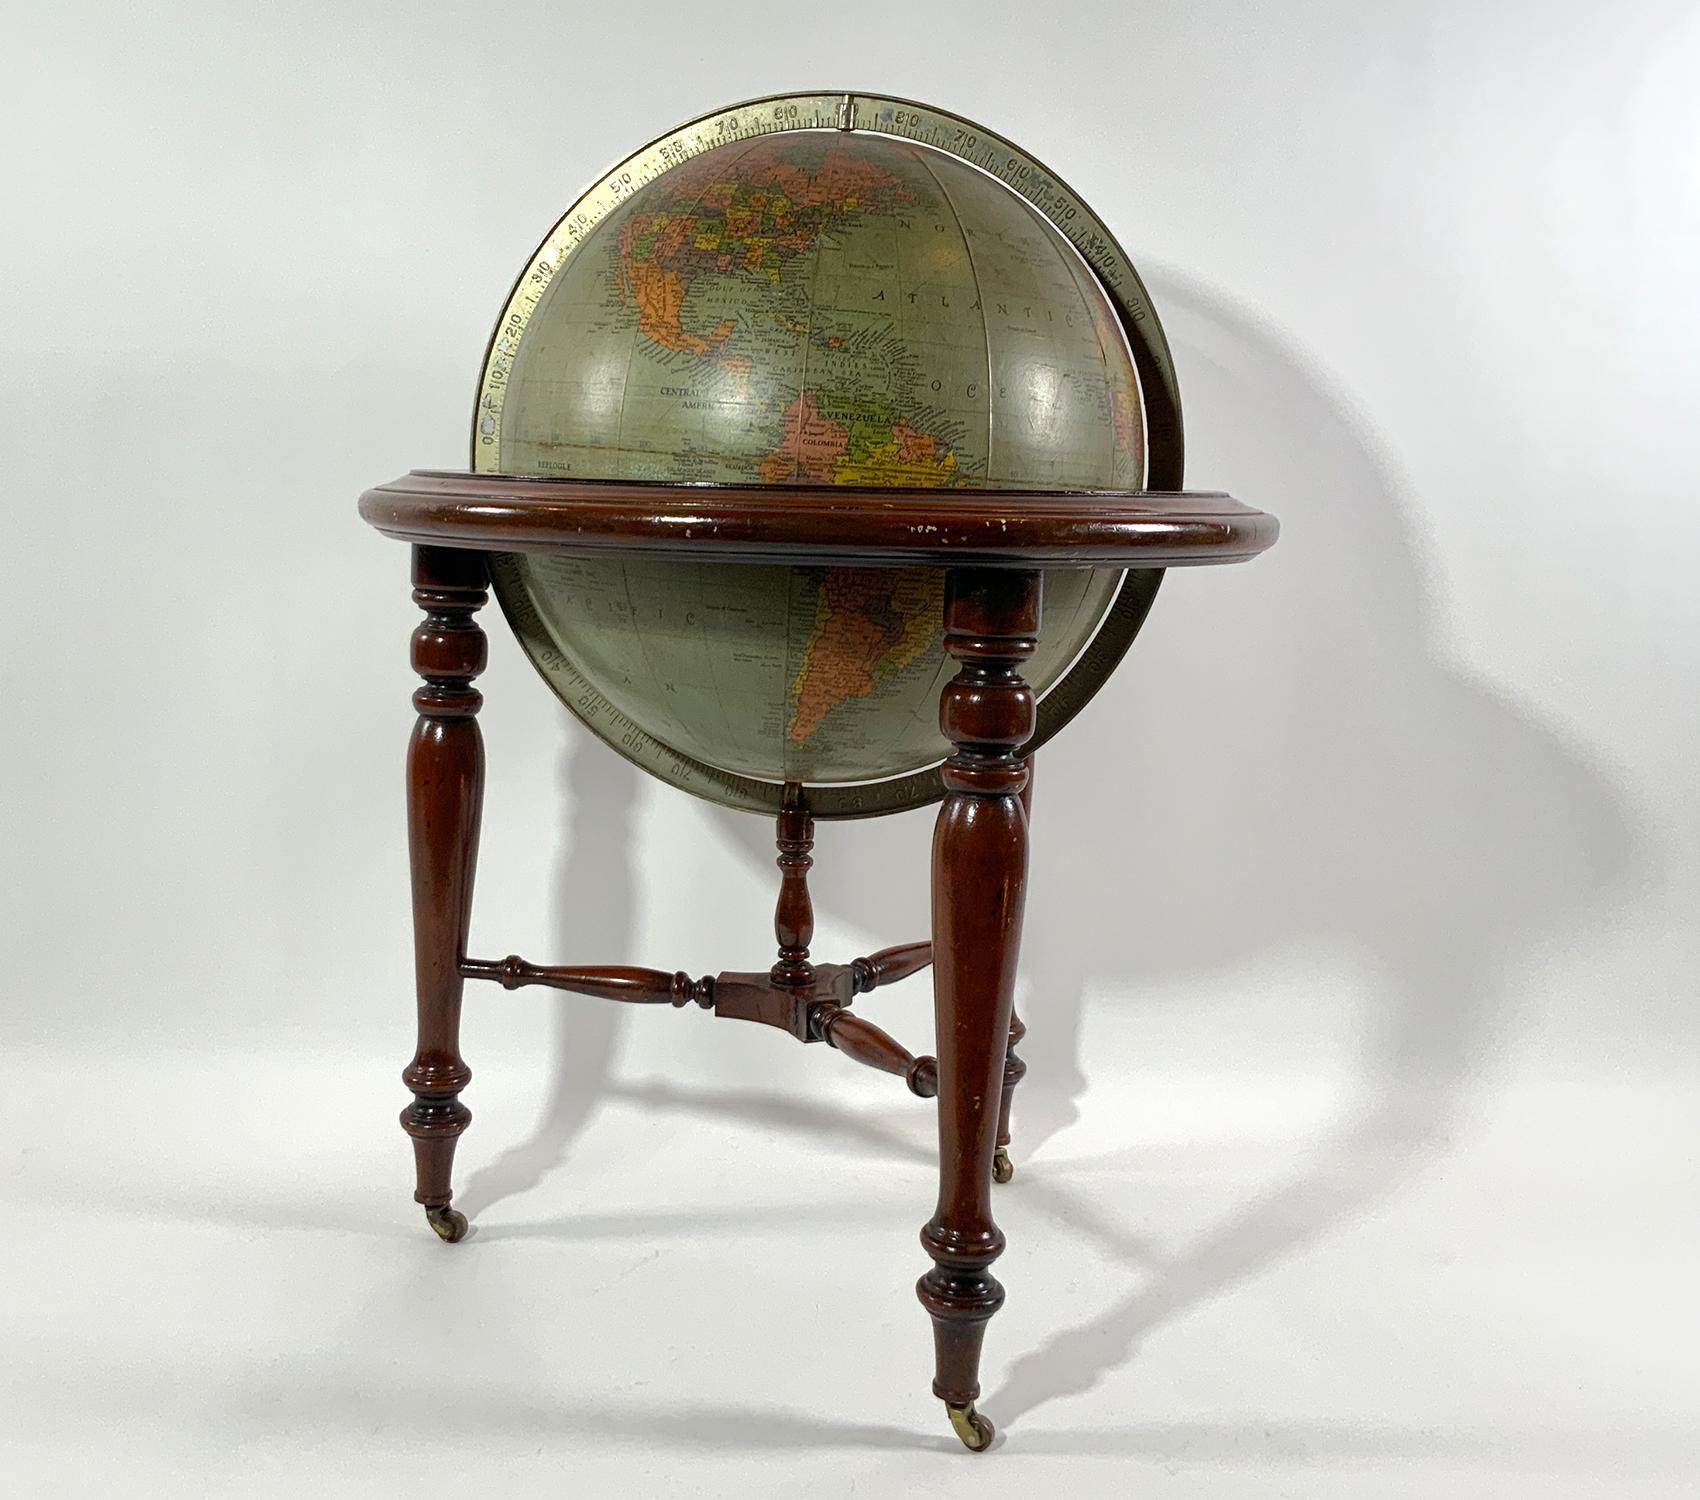 Library globe on quality mahogany stand with brass casters and ring. By Replogle of Chicago. Gustav Bruechmann, Cartographer. This has a lot of character but does have nicks and dings and scrapes as well as some inpainting. Great prop. Circa 1940.